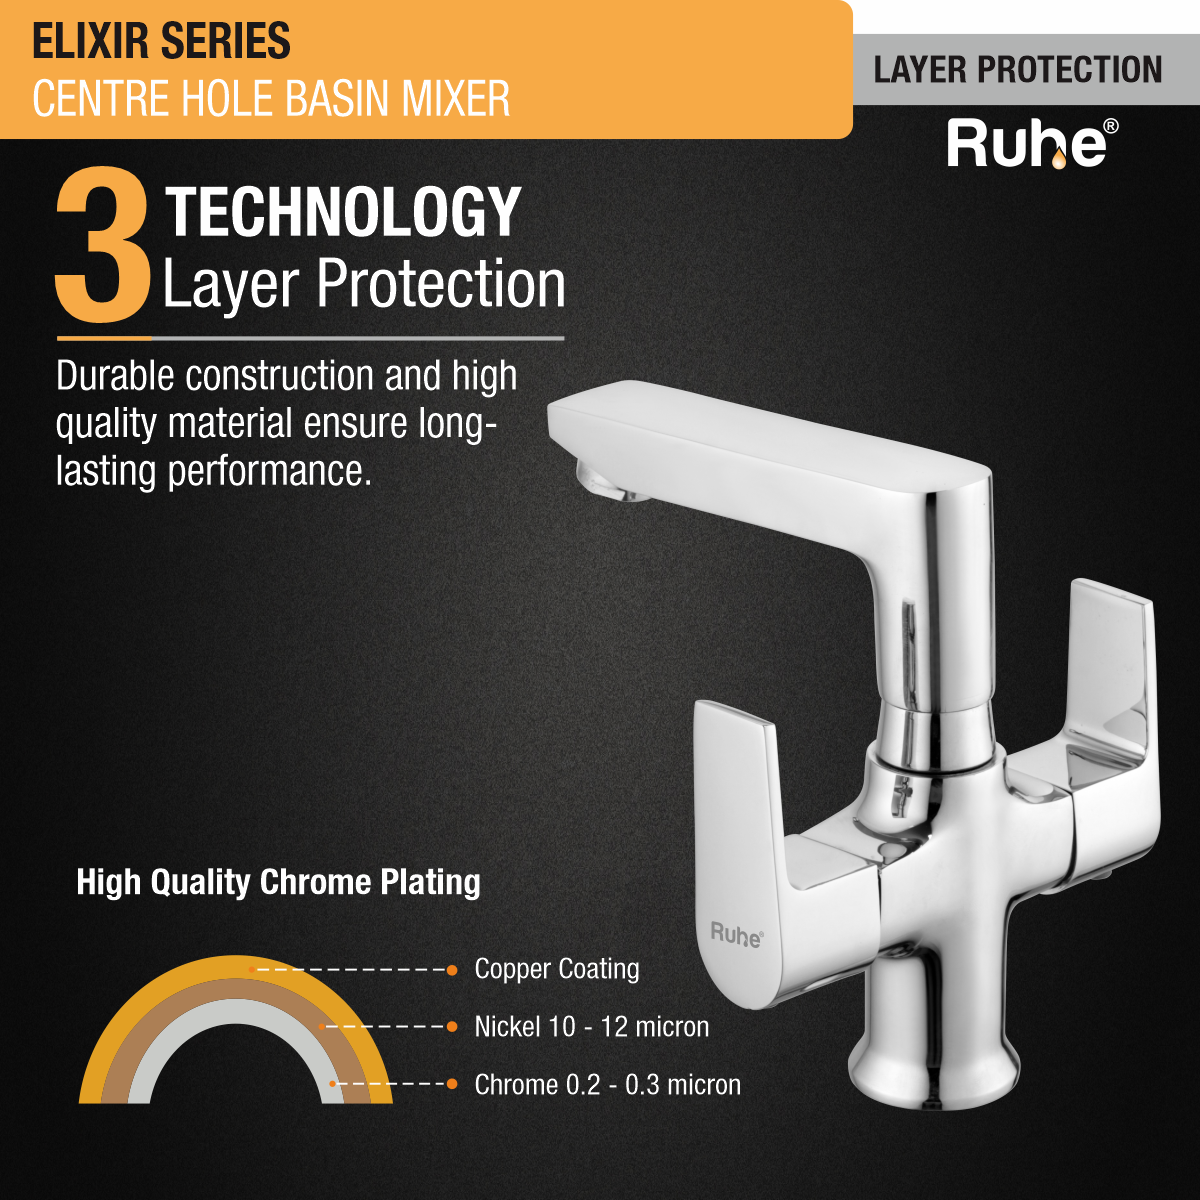 Elixir Centre Hole Basin Mixer with Small (7 inches) Swivel Spout Faucet 3 layer protection